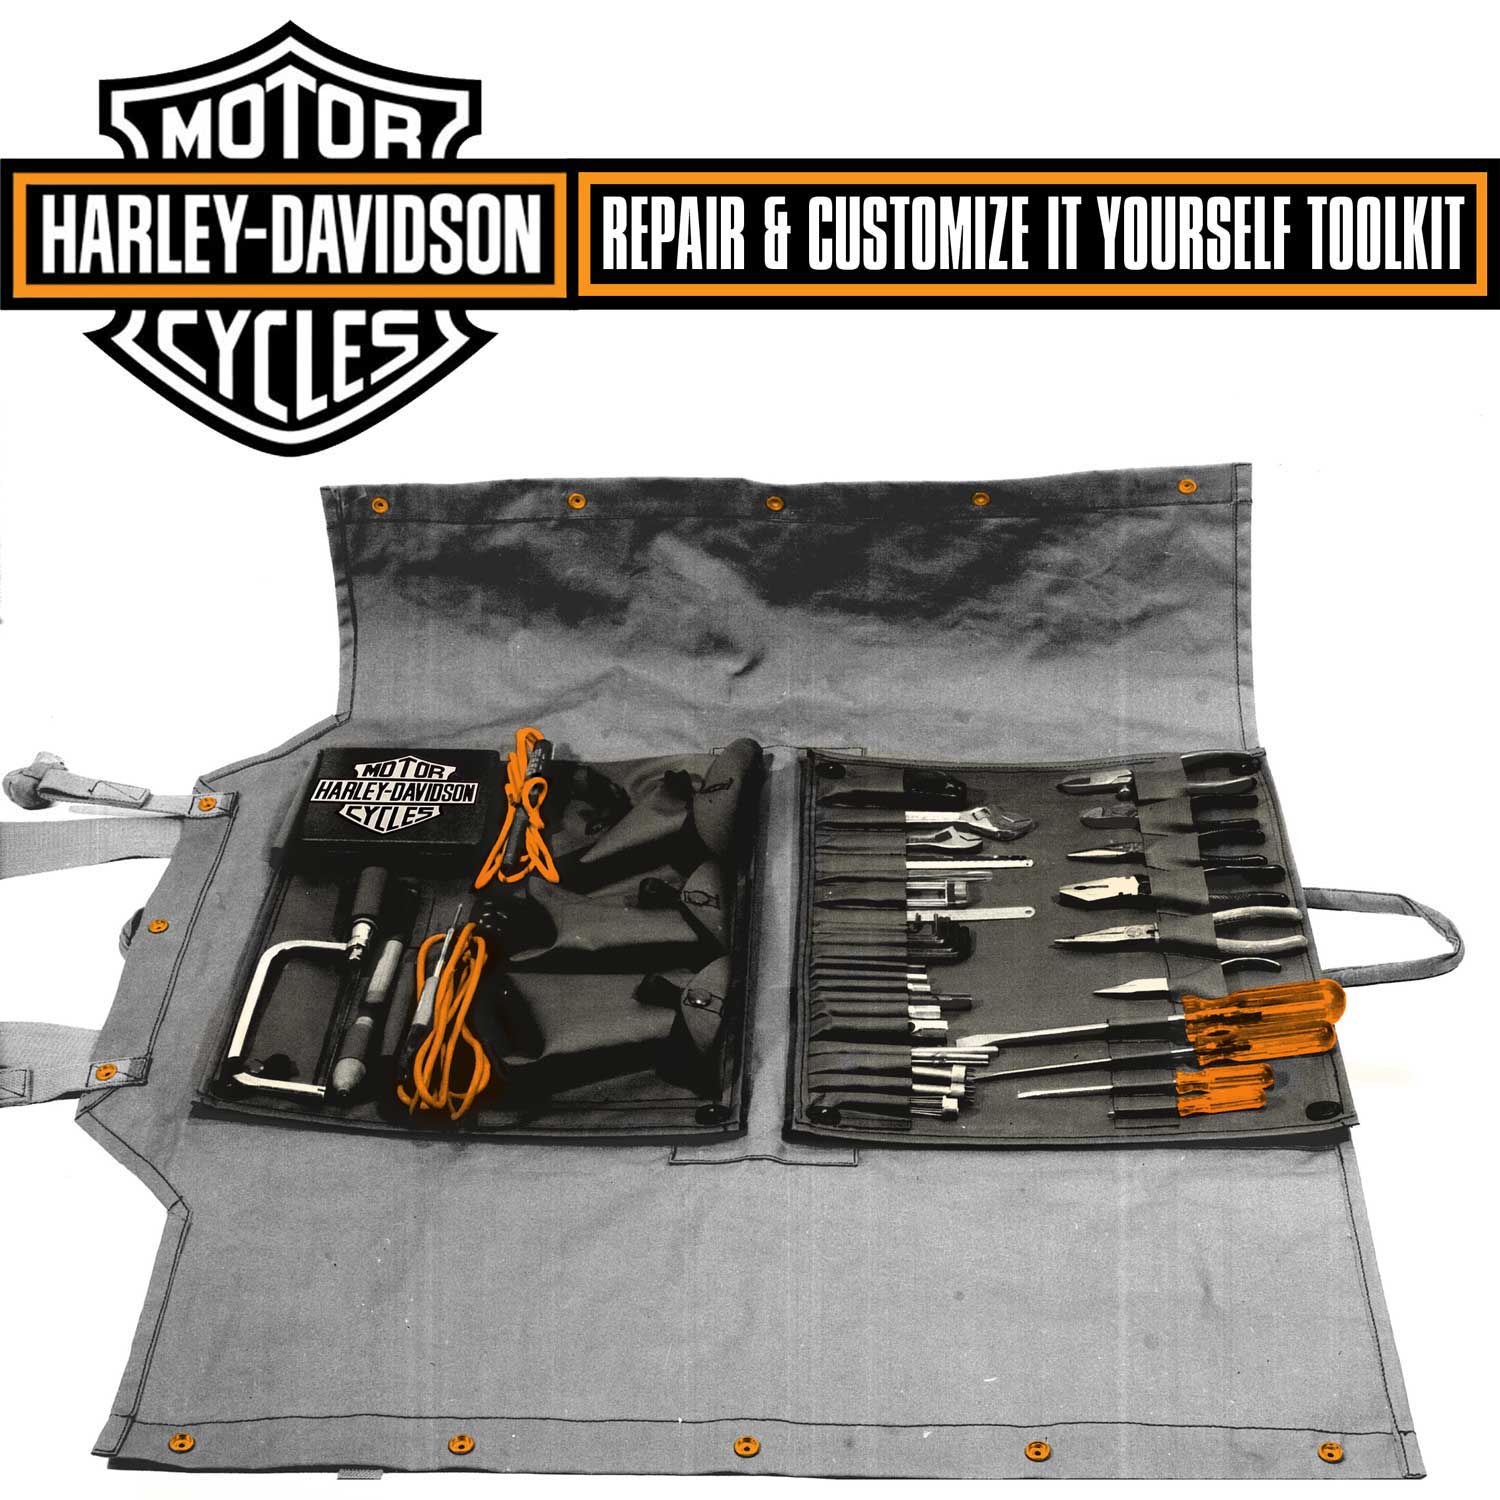 Pit Posse Harley Davidson Folding Tool Set 12 in 1 SAE Motorcycle Tool Harley Davidson Tools and Accessories Gift Idea 